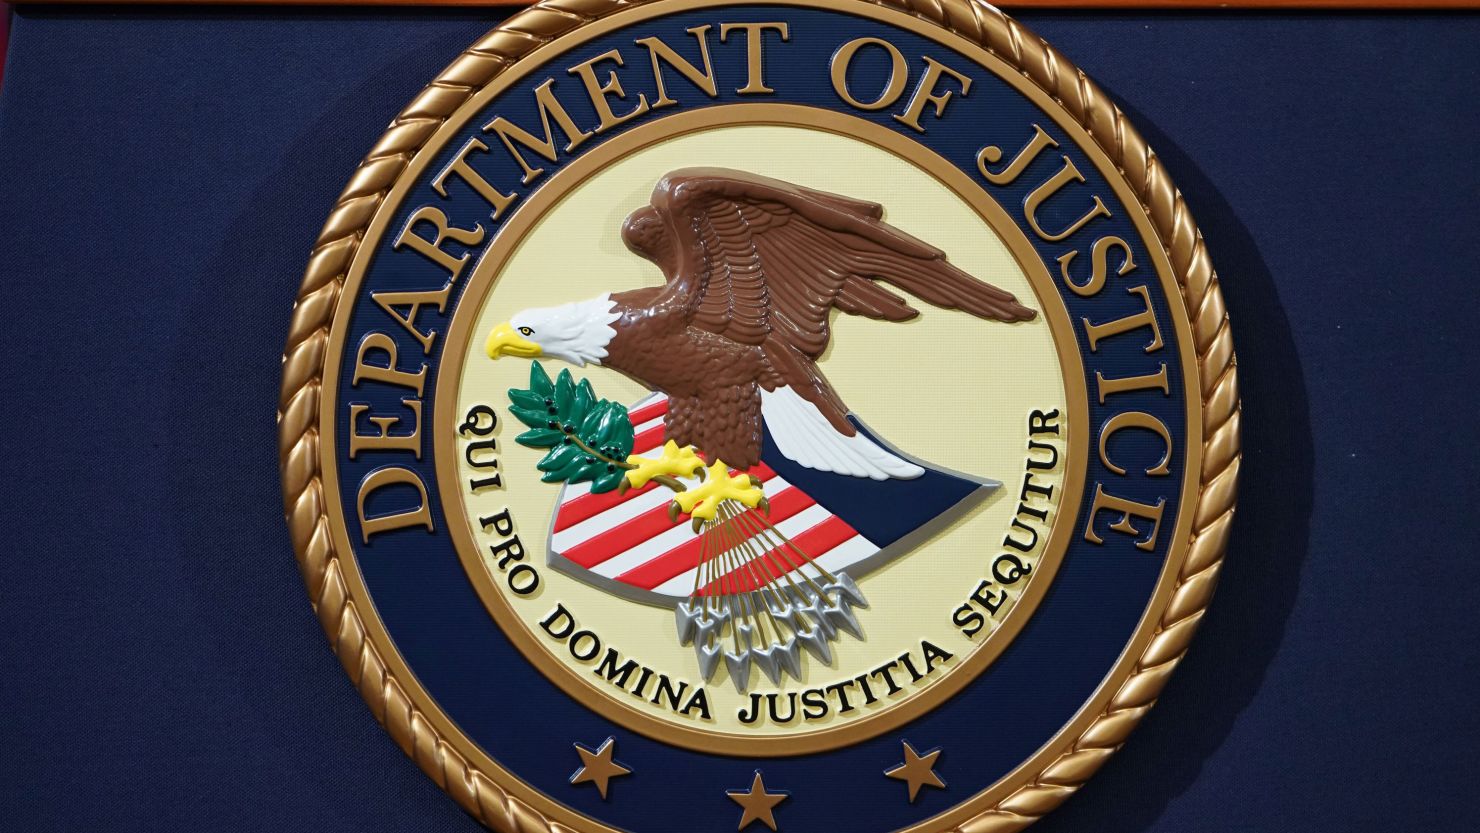 The Department of Justice seal is seen on a lectern ahead of a press conference announcing efforts against computer hacking and extortion at the Department of Justice in Washington, DC on November 28, 2018. (Photo by MANDEL NGAN / AFP) (Photo by MANDEL NGAN/AFP via Getty Images)